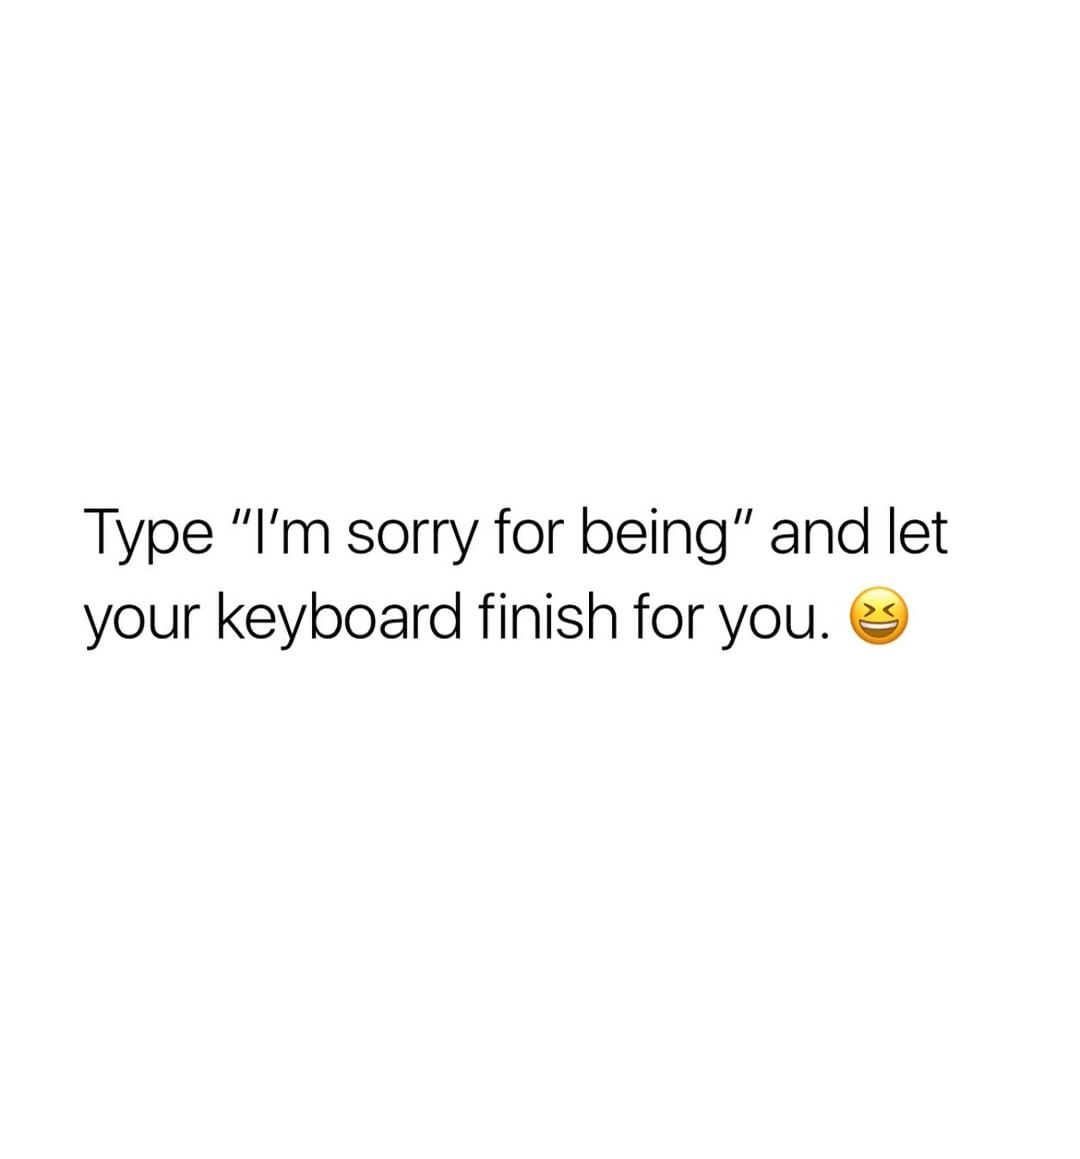 Type "I'm sorry for being" and let your keyboard finish for you.